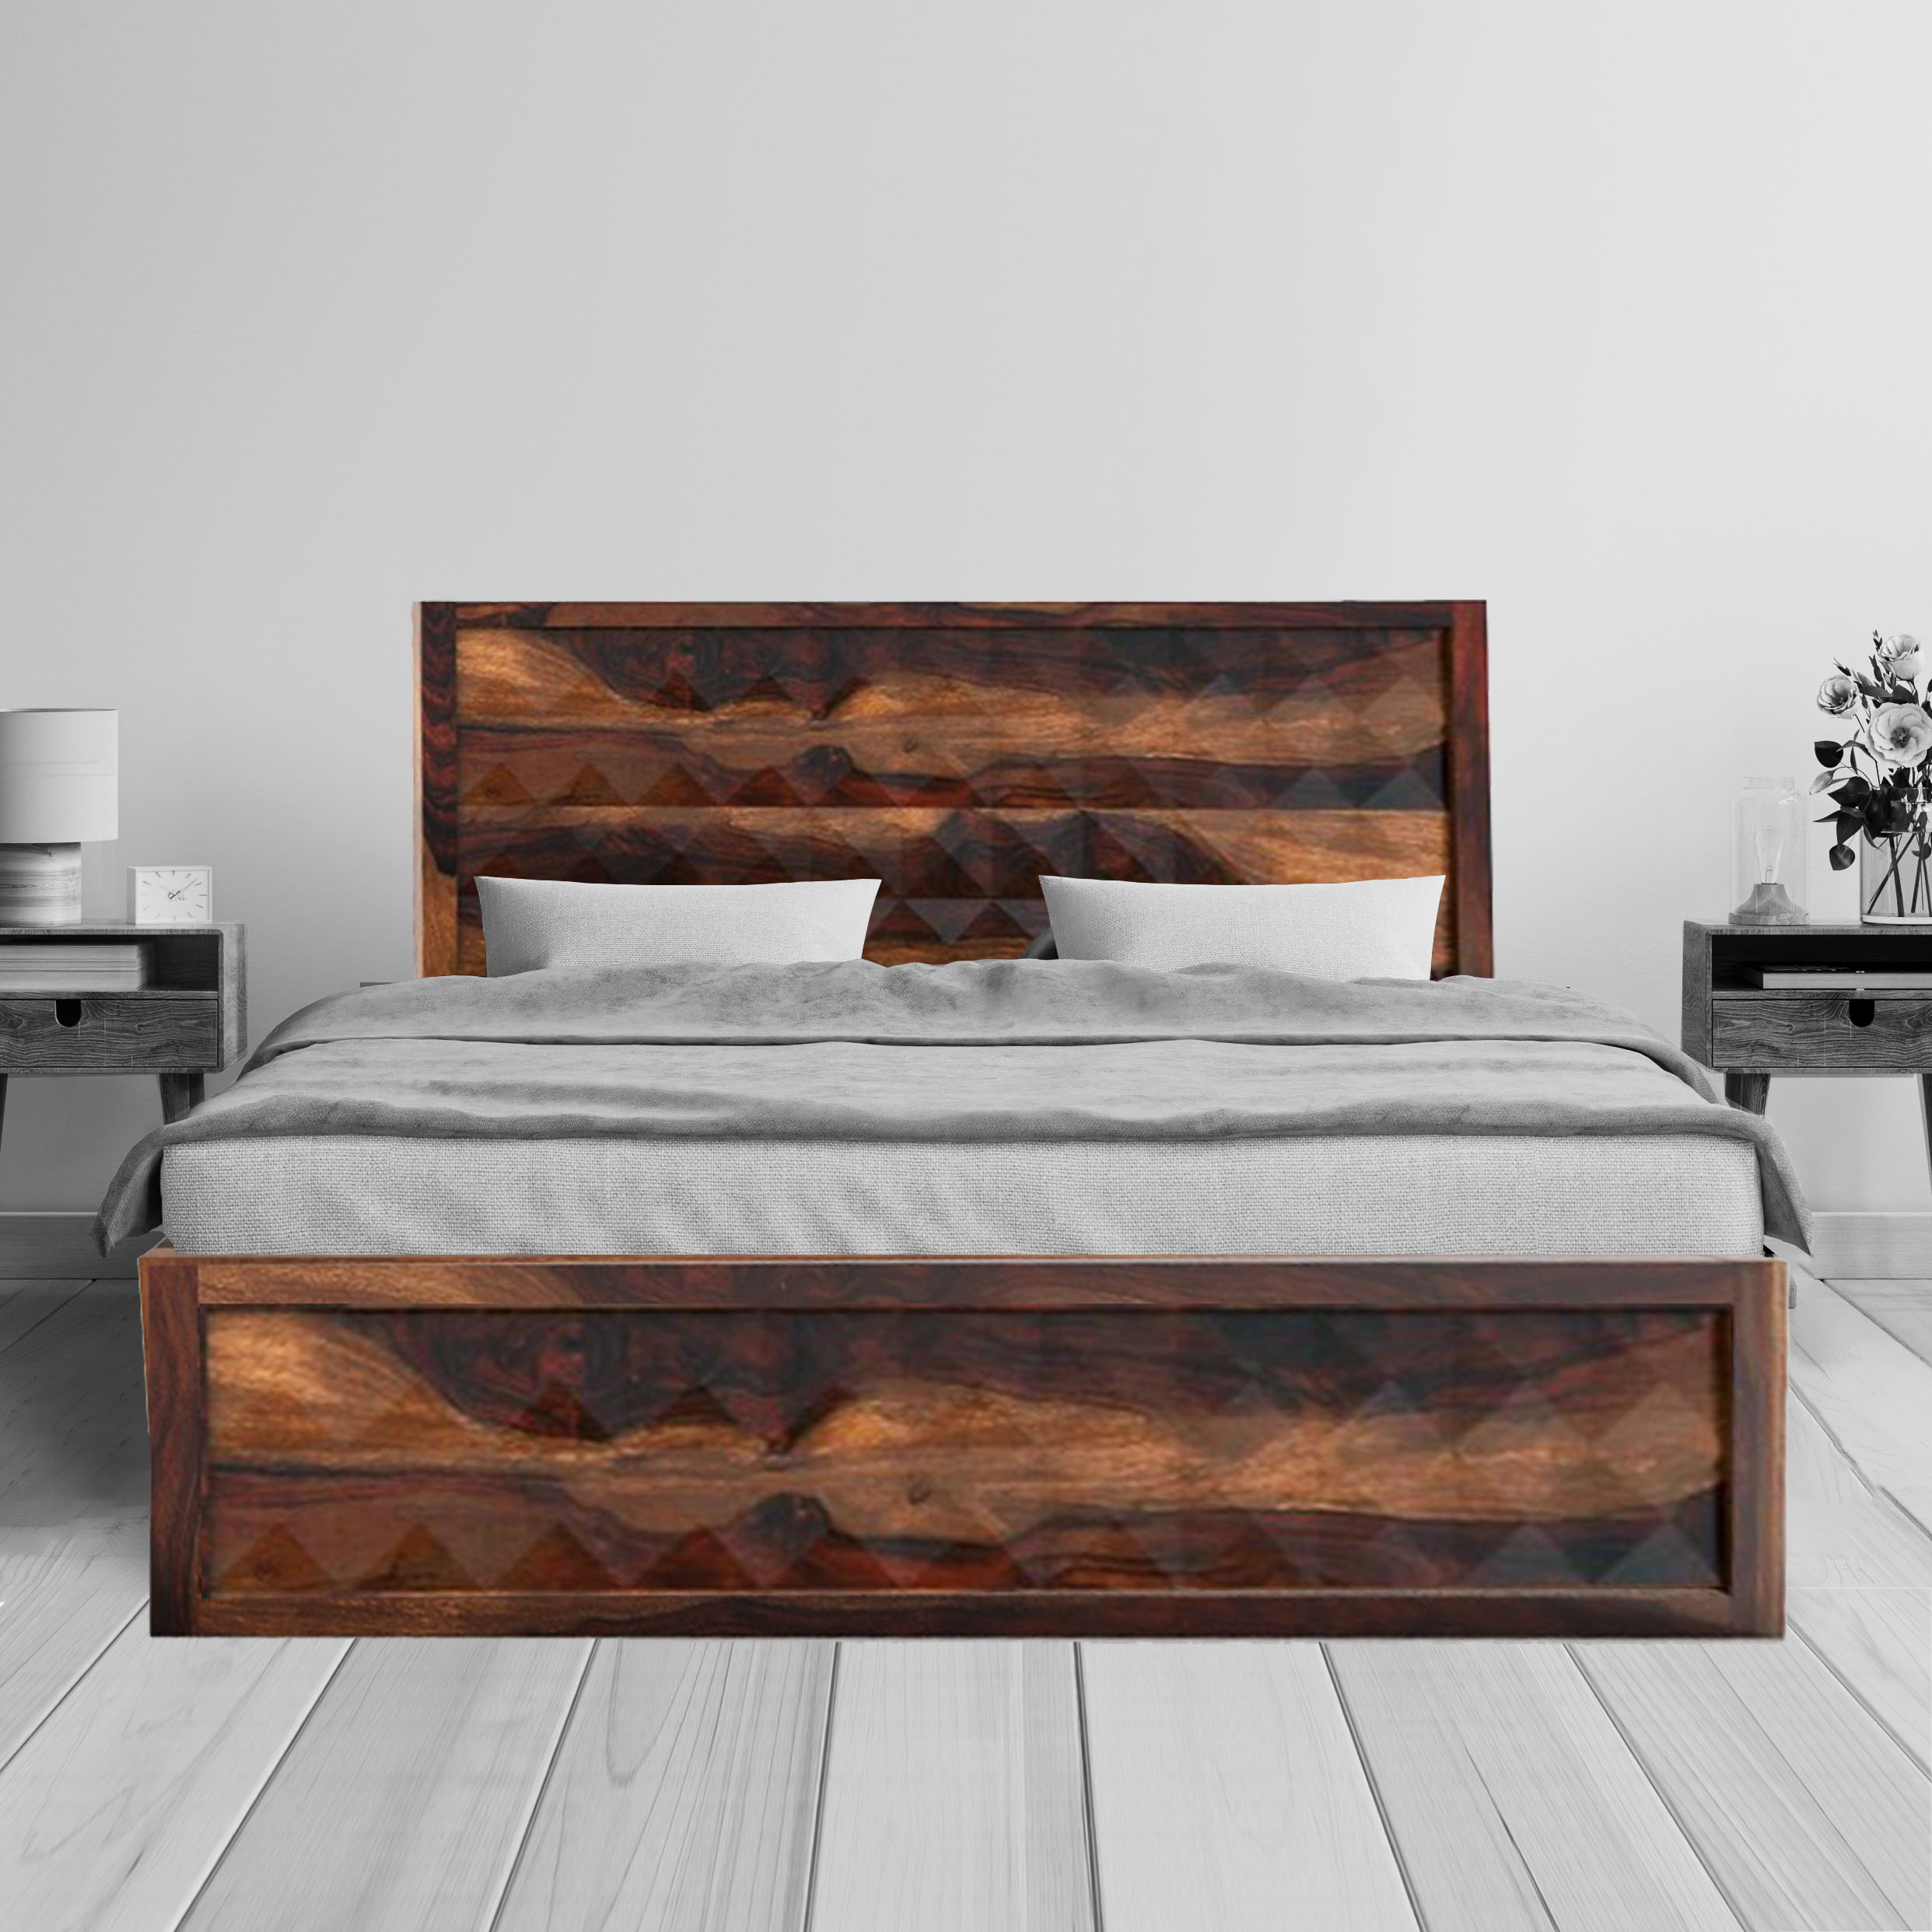 Diamond solid wood queen size walnut finish bed